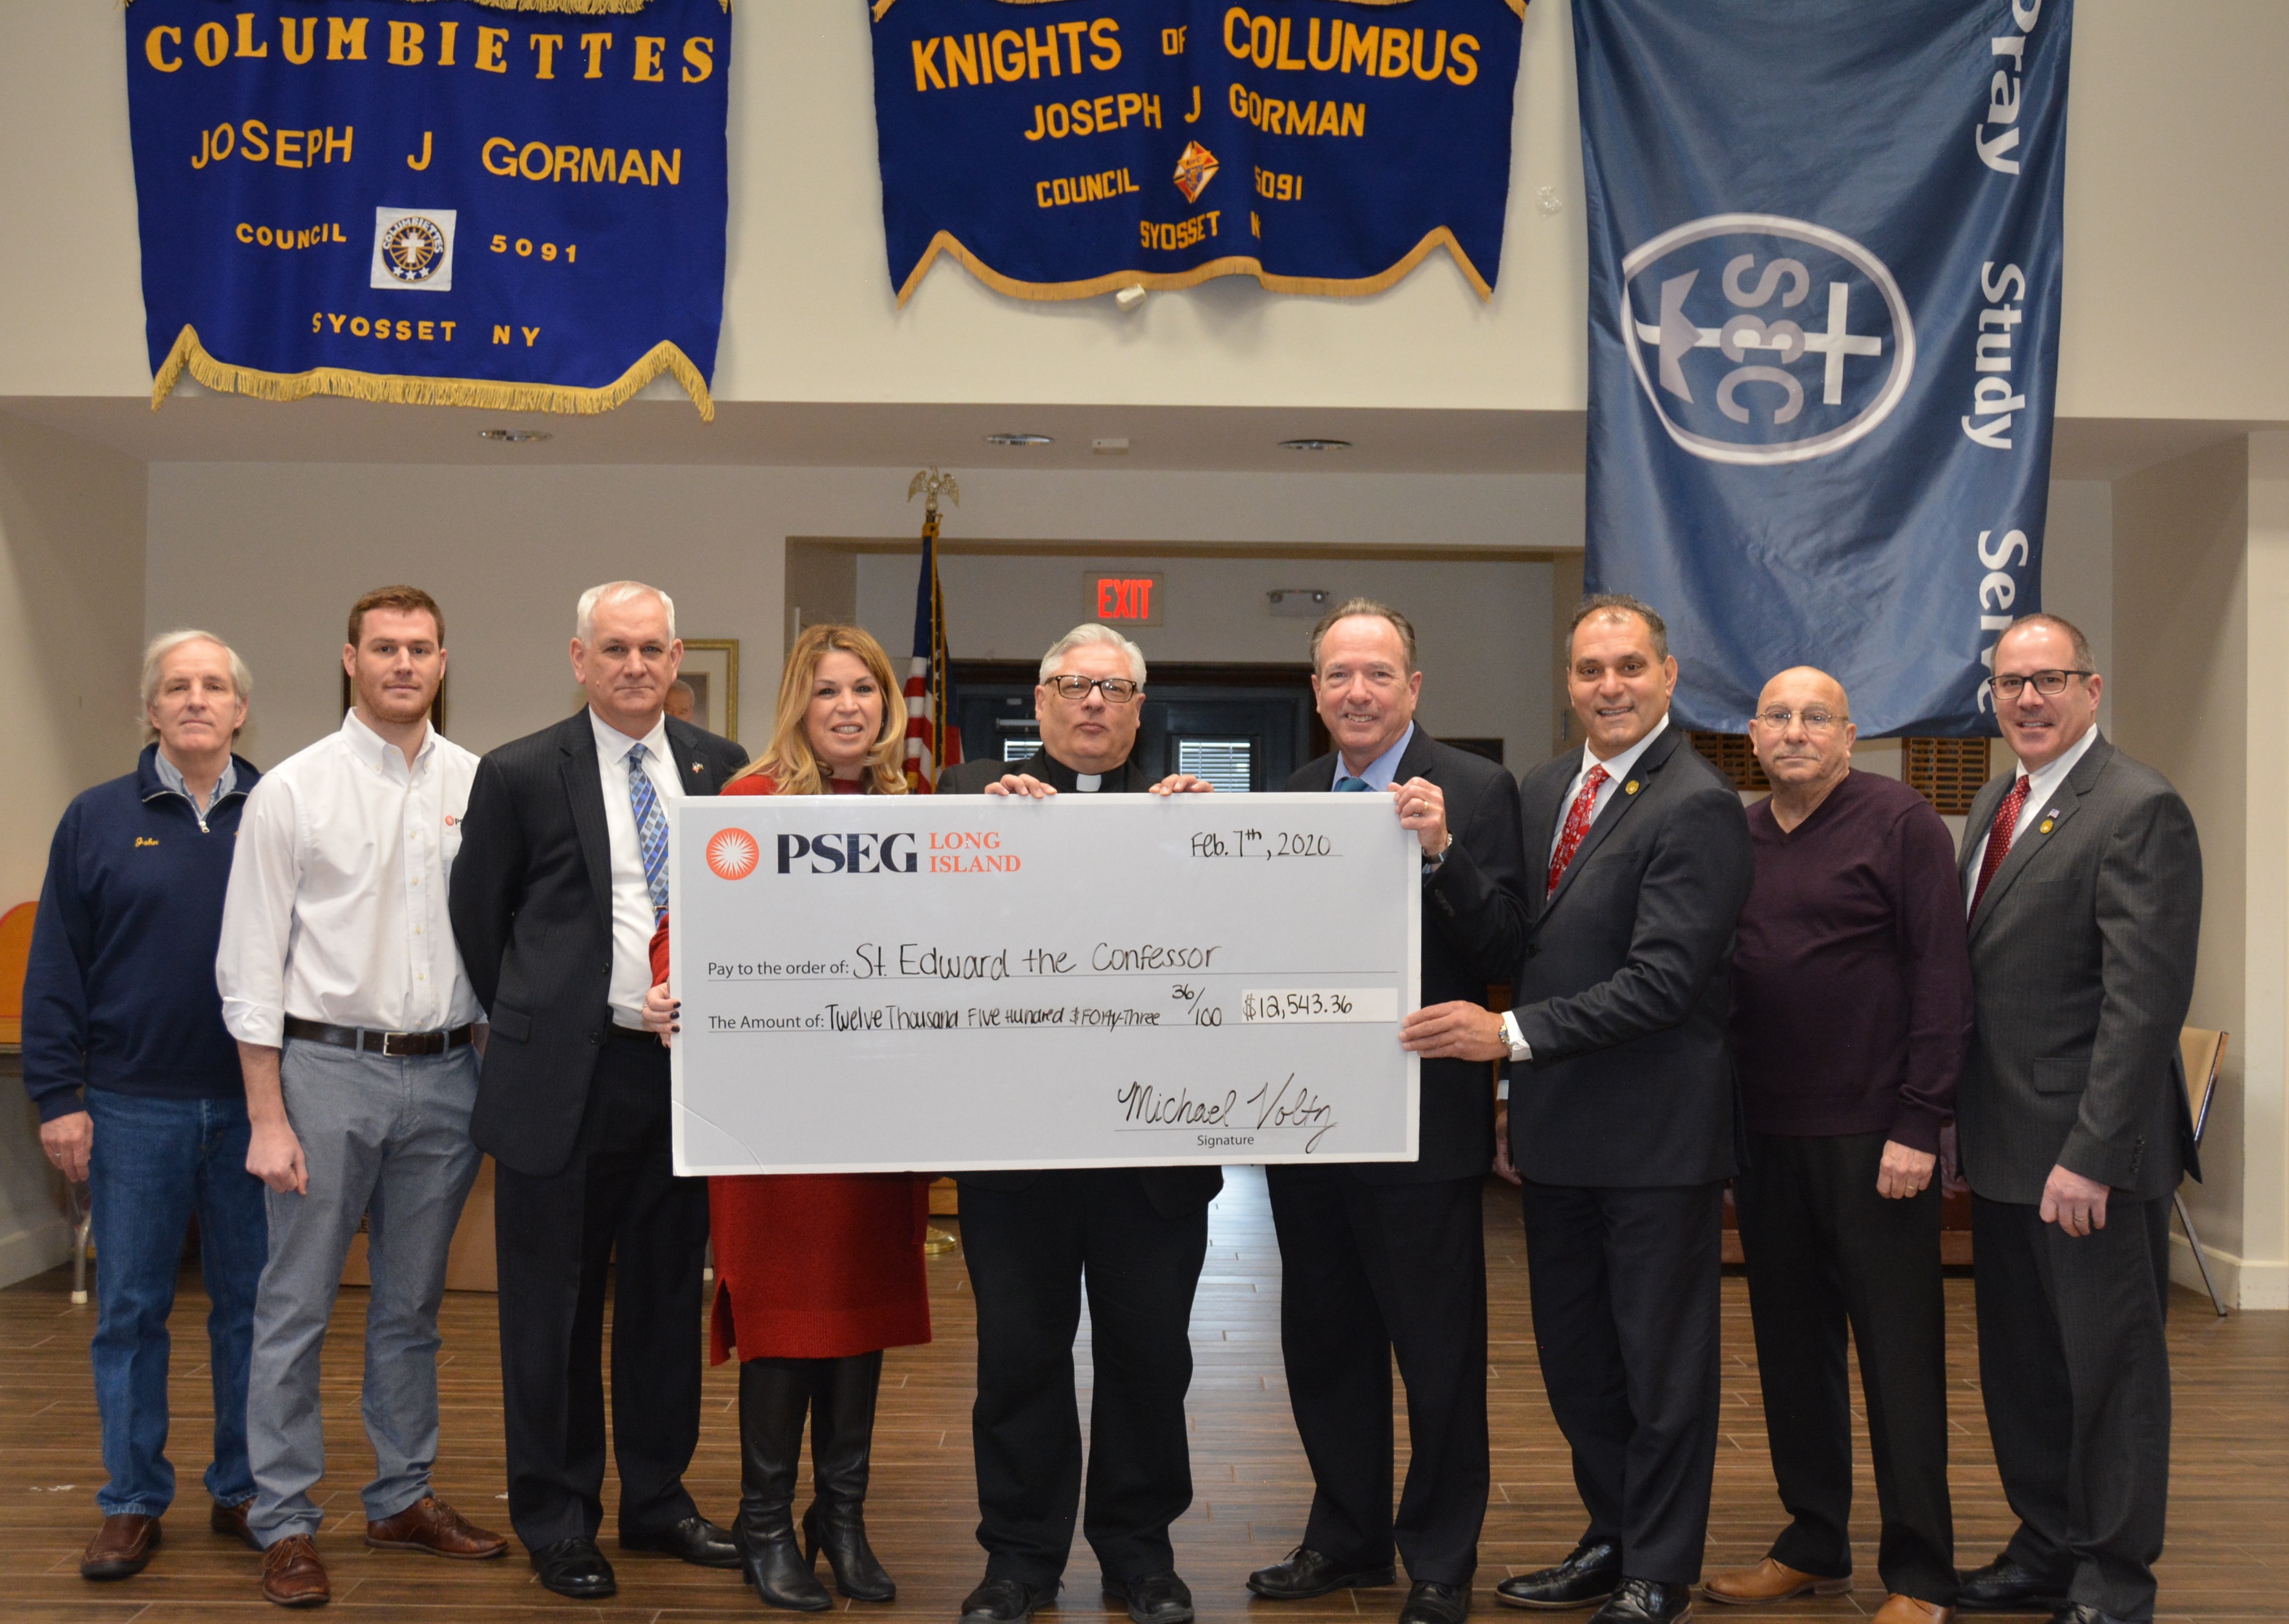 PSEG Long Island recently presented St. Edward the Confessor with a rebate check for more than $12,500 for making energy efficiency upgrades to the lighting inside and outside of its building. Pictured from left to right are: John O’Connor, Deputy Grand Knight , Knights of Columbus, Dillon Buchberg Energy Consultant, PSEG Long Island, Don MacAvoy, Chancellor of Knights of Columbus and parishioner at St. Edward the Confessor, Suzanne Brienza, Director of Customer Experience and Utility Marketing, PSEG Long Island, Father Mike Maffeo, Pastor, St. Edward the Confessor, Walter Hoefer, Contract Manager, PSEG Long Island, Joseph Saladino Supervisor, Town of Oyster Bay, and Richard LaMarca, Oyster Bay Town Clerk.